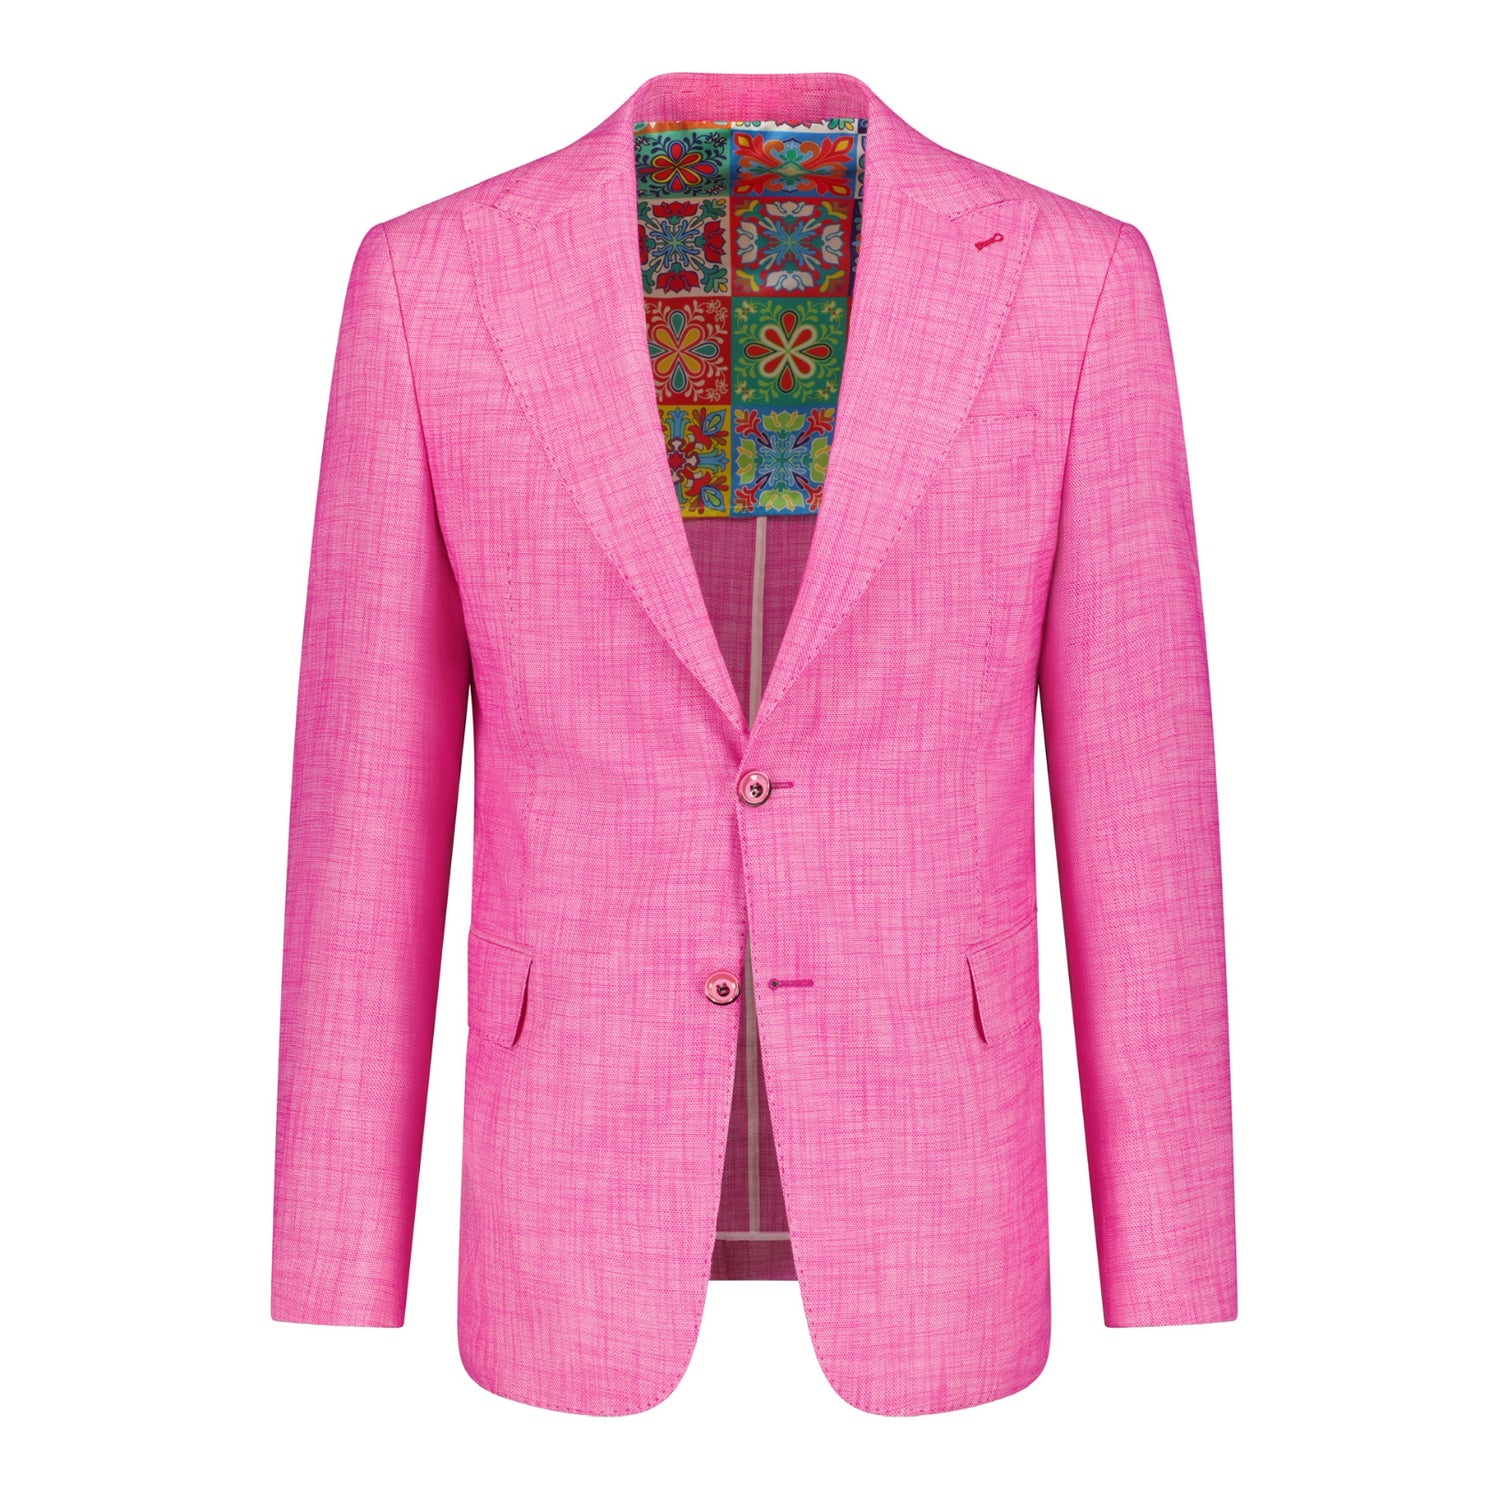 The Candy Linen Jacket